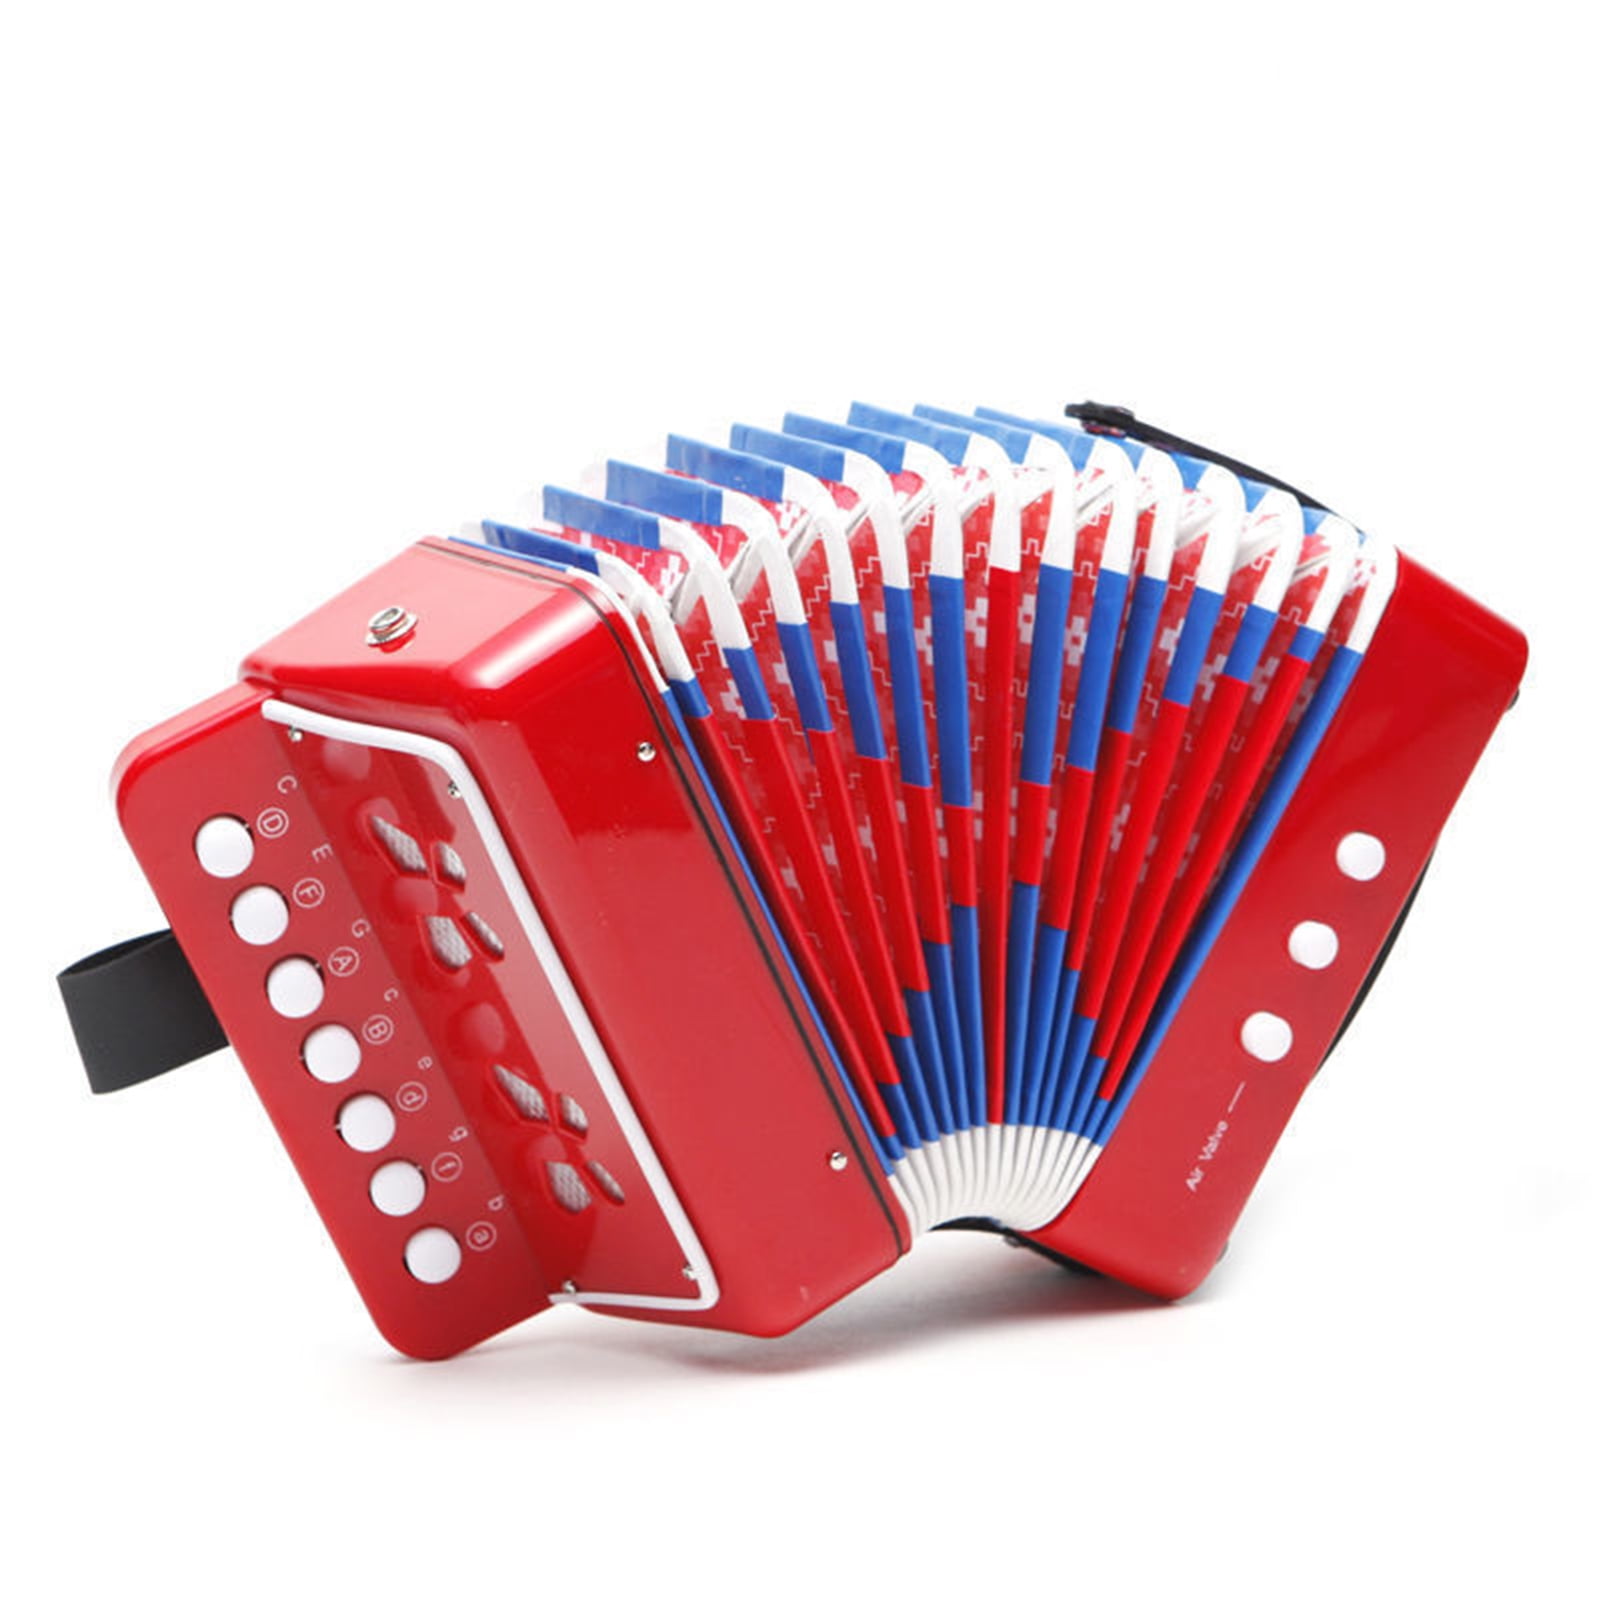 Kids Accordion, Professional Accordian Toy 17 Key 8 Bass Piano Accordion  for Students, Beginner Accordion Mini Musical Instruments for Boys & Girls